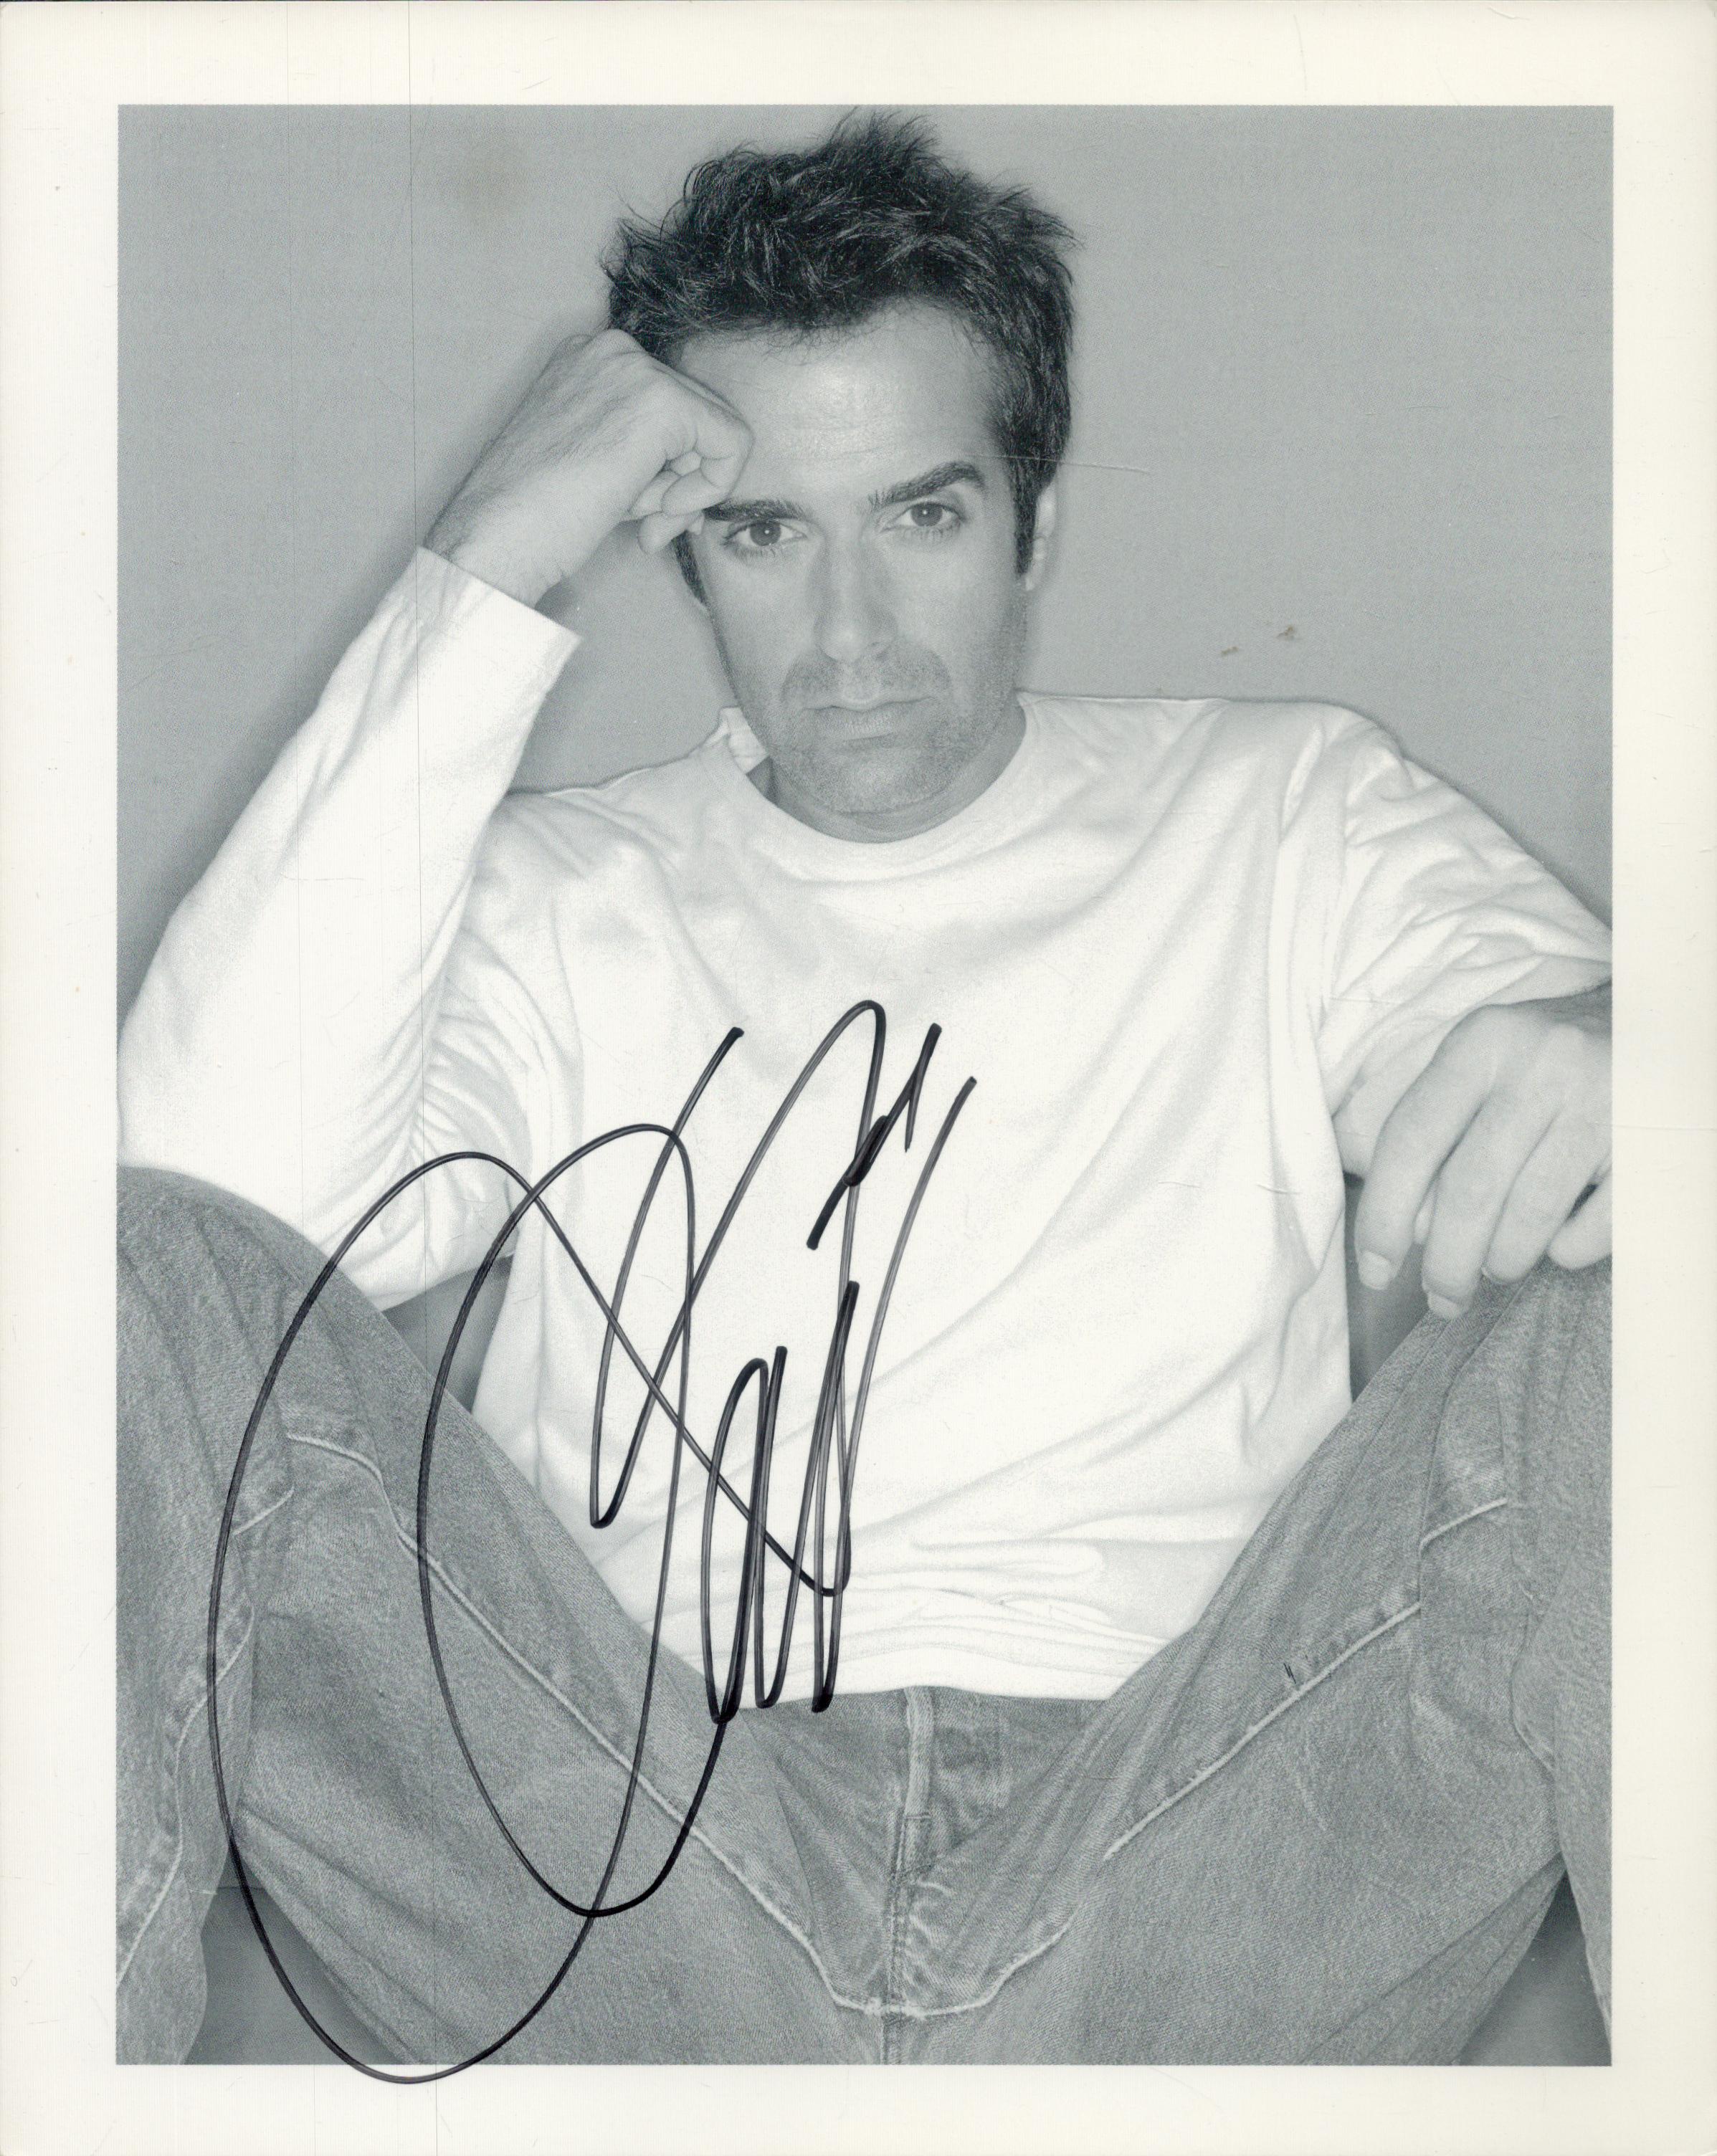 DAVID COPPERFIELD American Magician signed 8x10 Photo. Good Condition. All autographs come with a